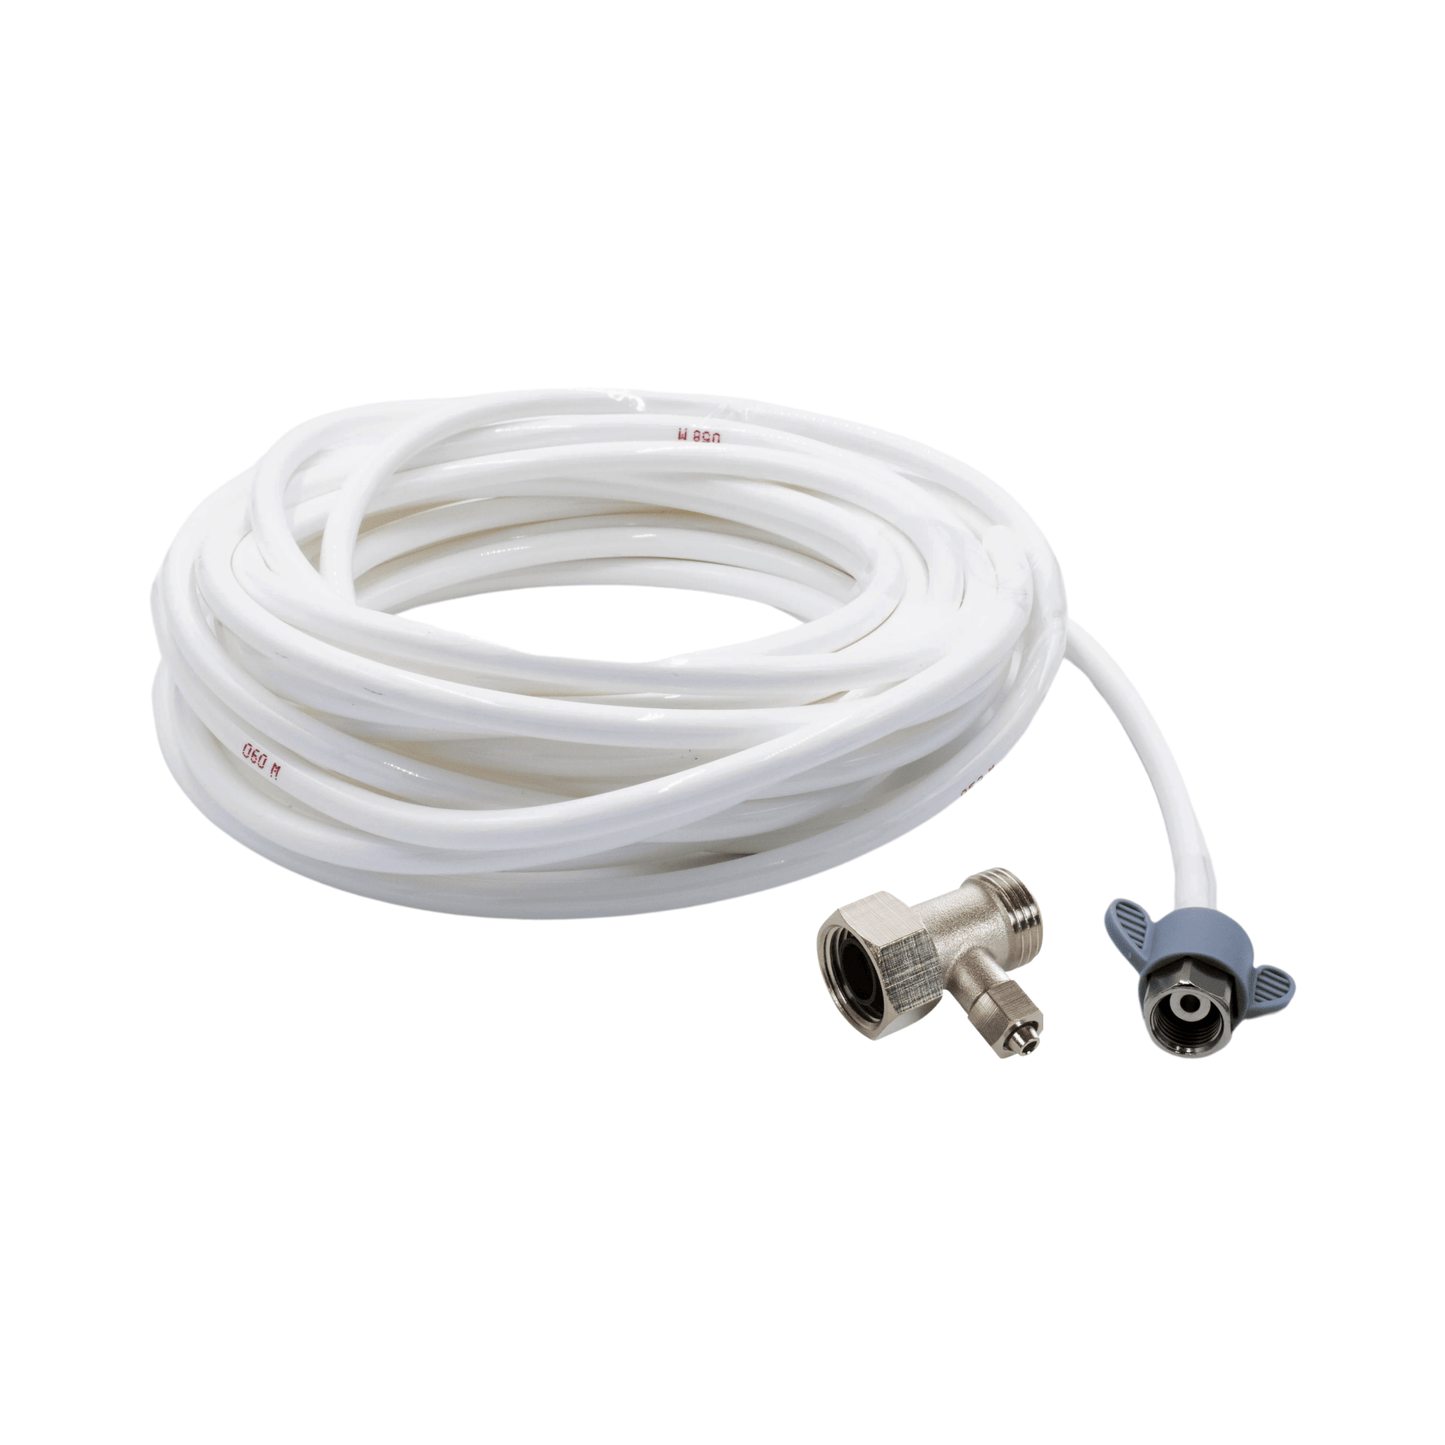 NEO Accessory Kit: Alternative Installation for 1/2" Supply Valves - 32ft Plastic Hot Water Hose with 1/2" Metal T-Adapter